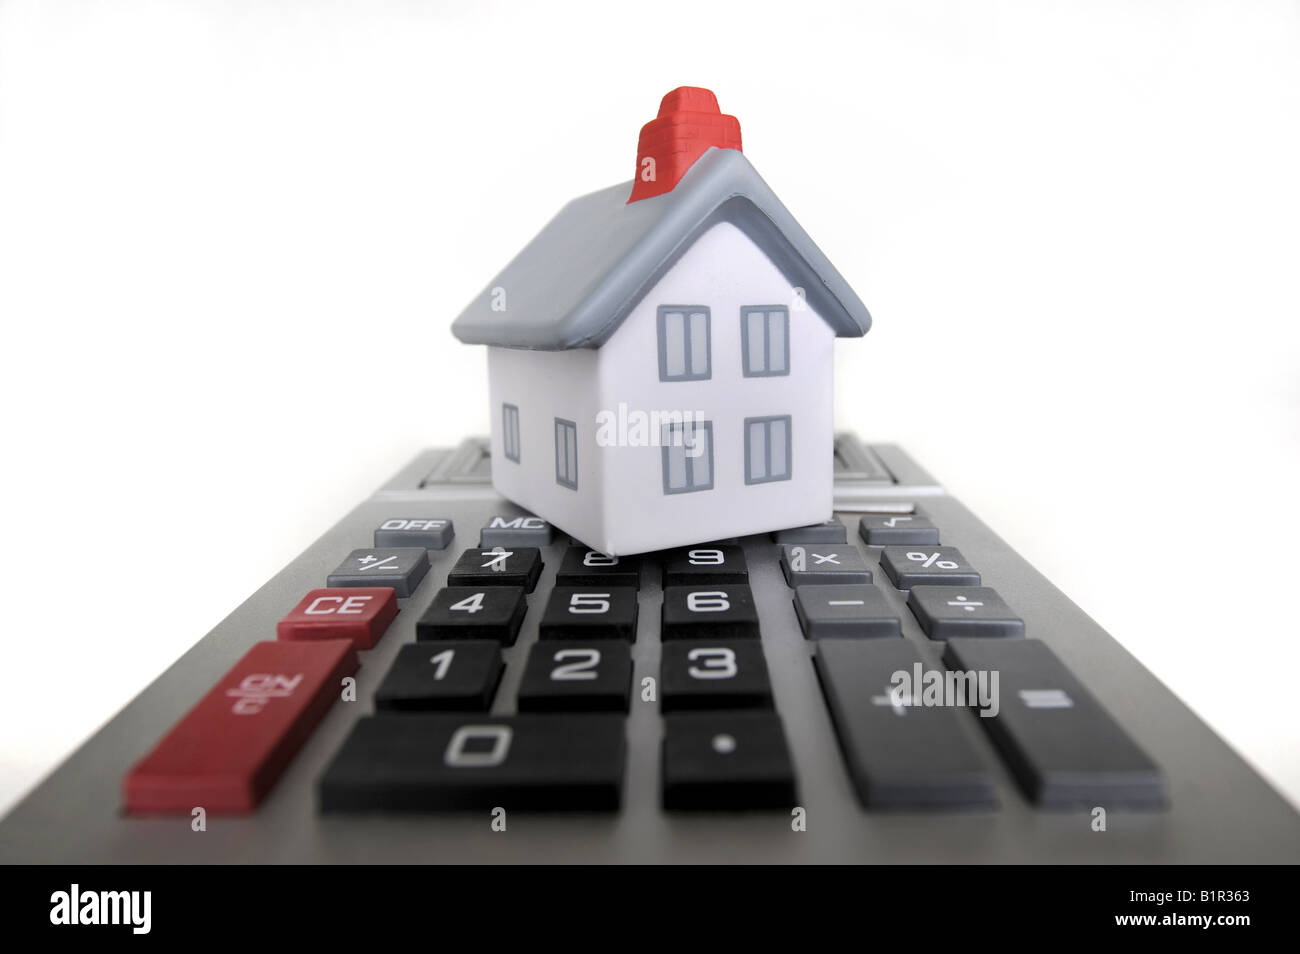 MODEL HOUSE WITH CALCULATOR RE HOUSING COSTS/BILLS/ECONOMY/MARKET Stock Photo